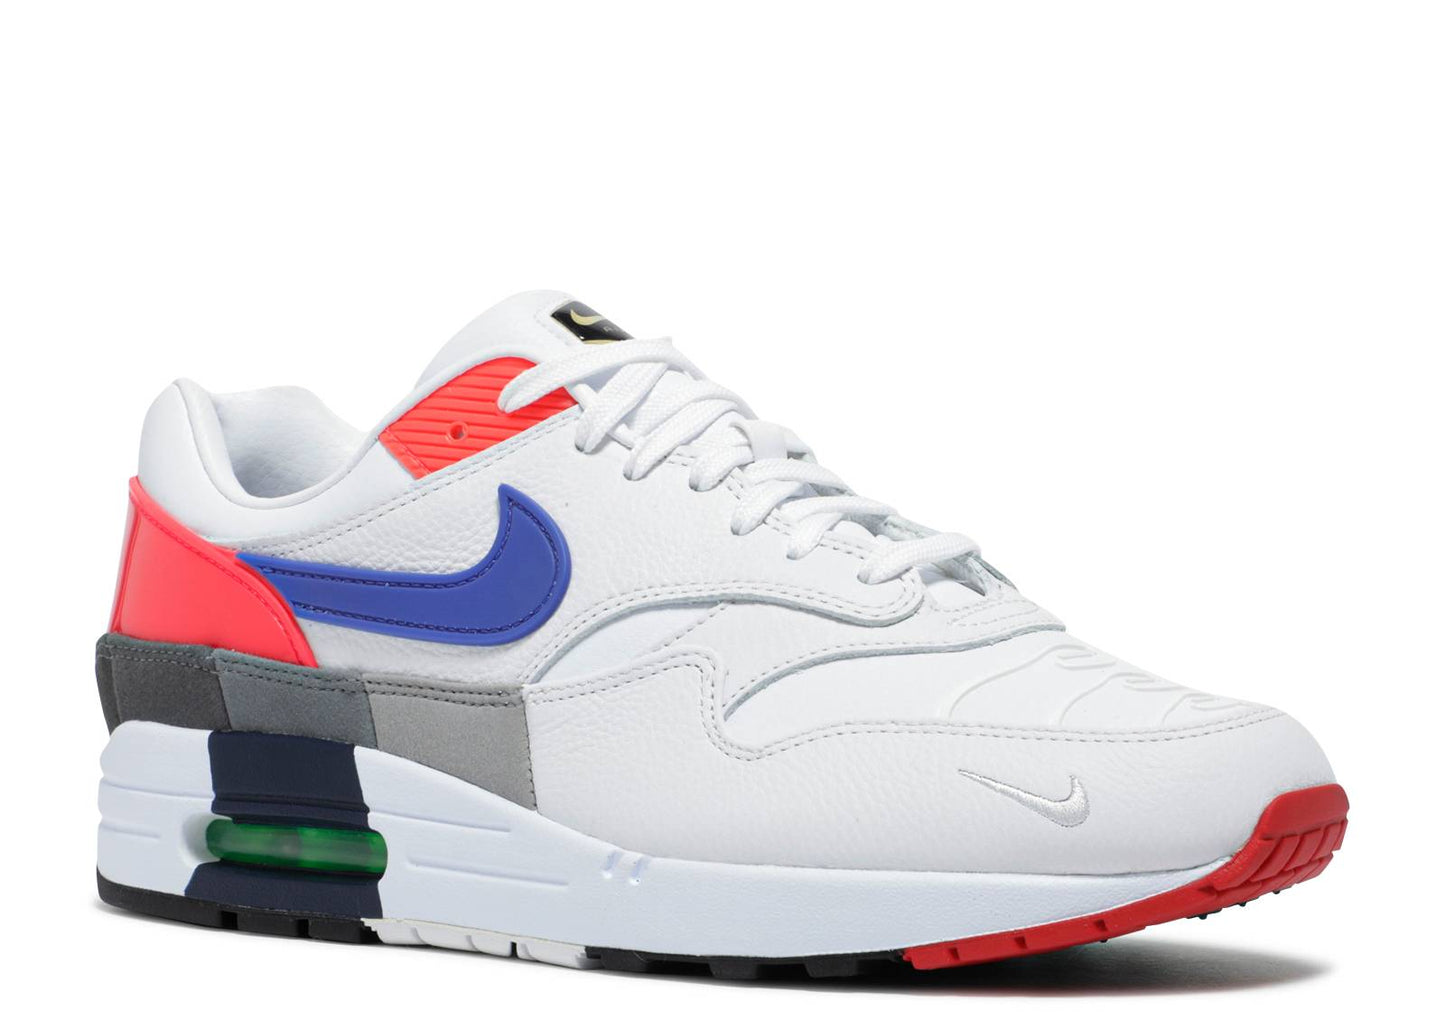 Nike Air Max 1 EOI "Evolution of Icons"